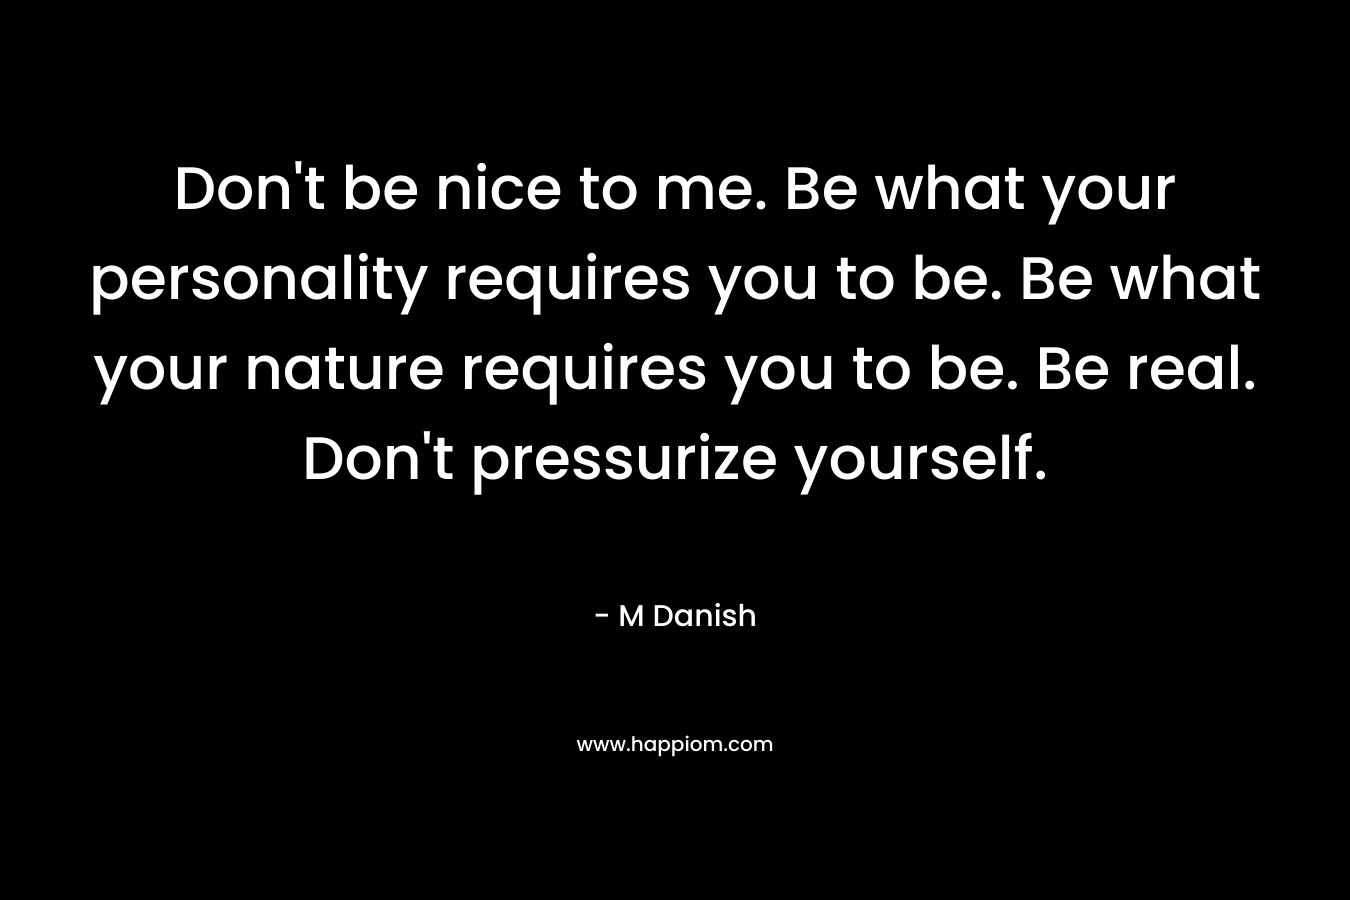 Don't be nice to me. Be what your personality requires you to be. Be what your nature requires you to be. Be real. Don't pressurize yourself.